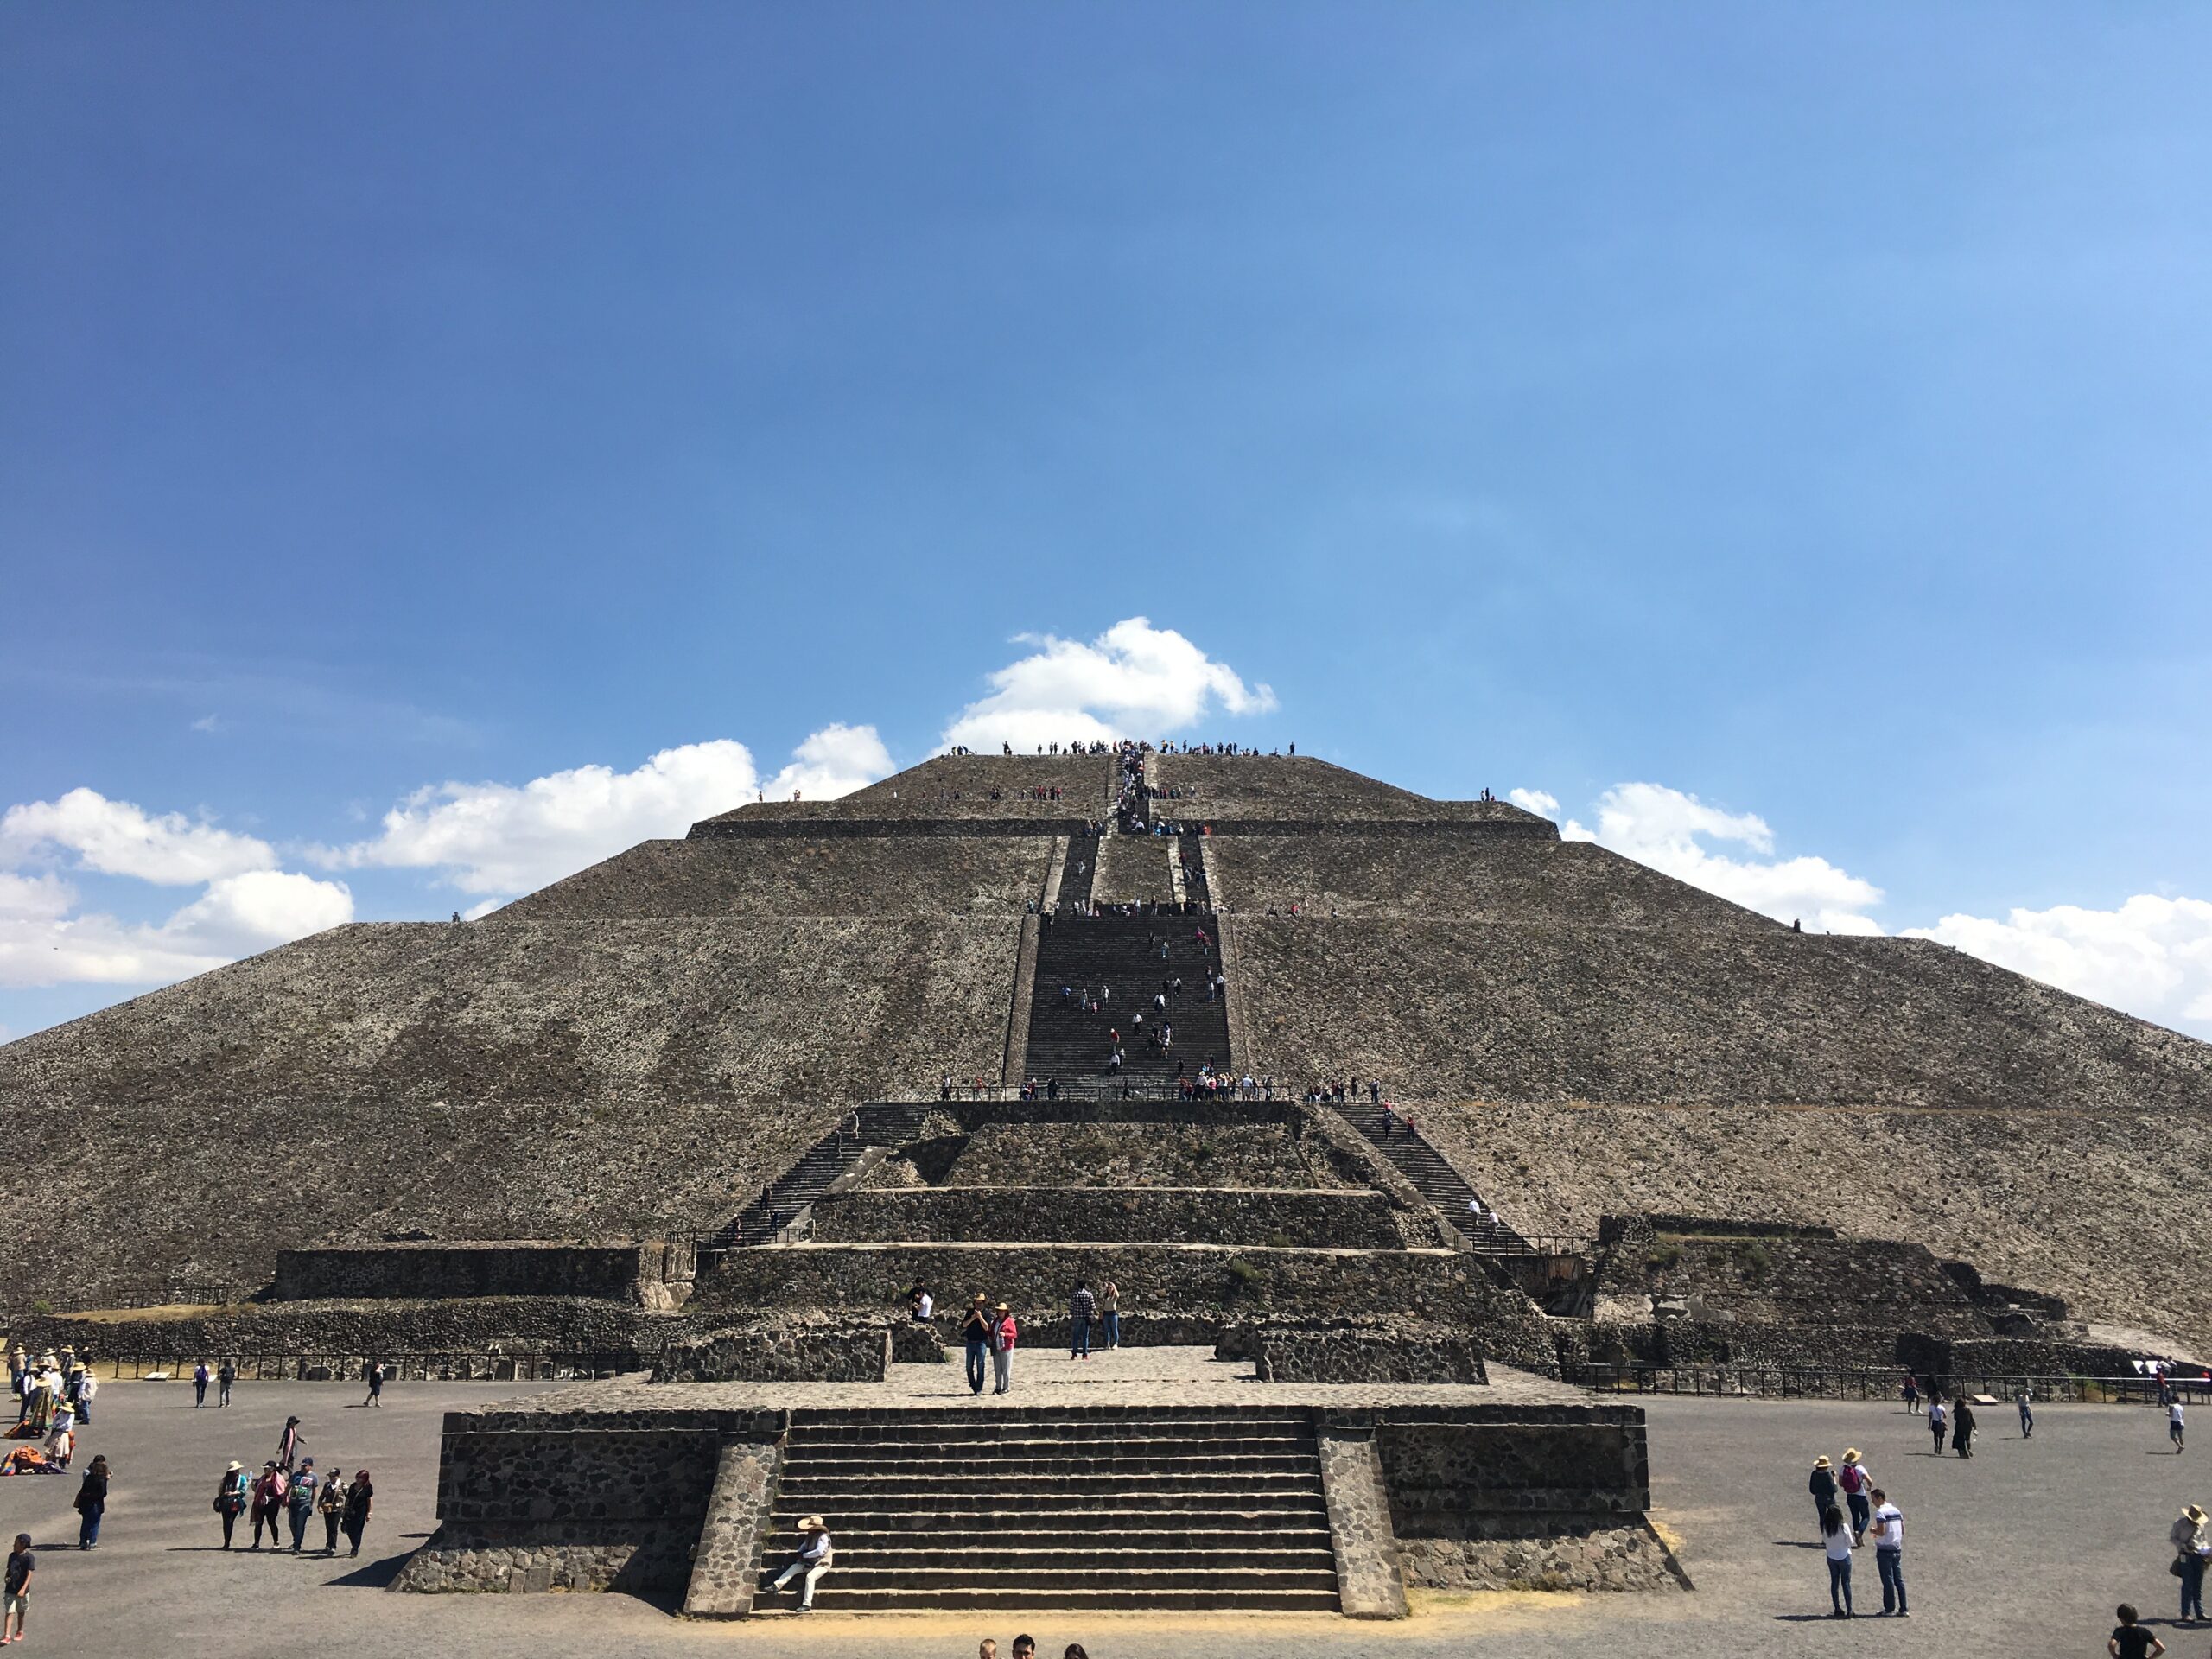 Pyramid of the Sun at Teotihuacan, north of Mexico City